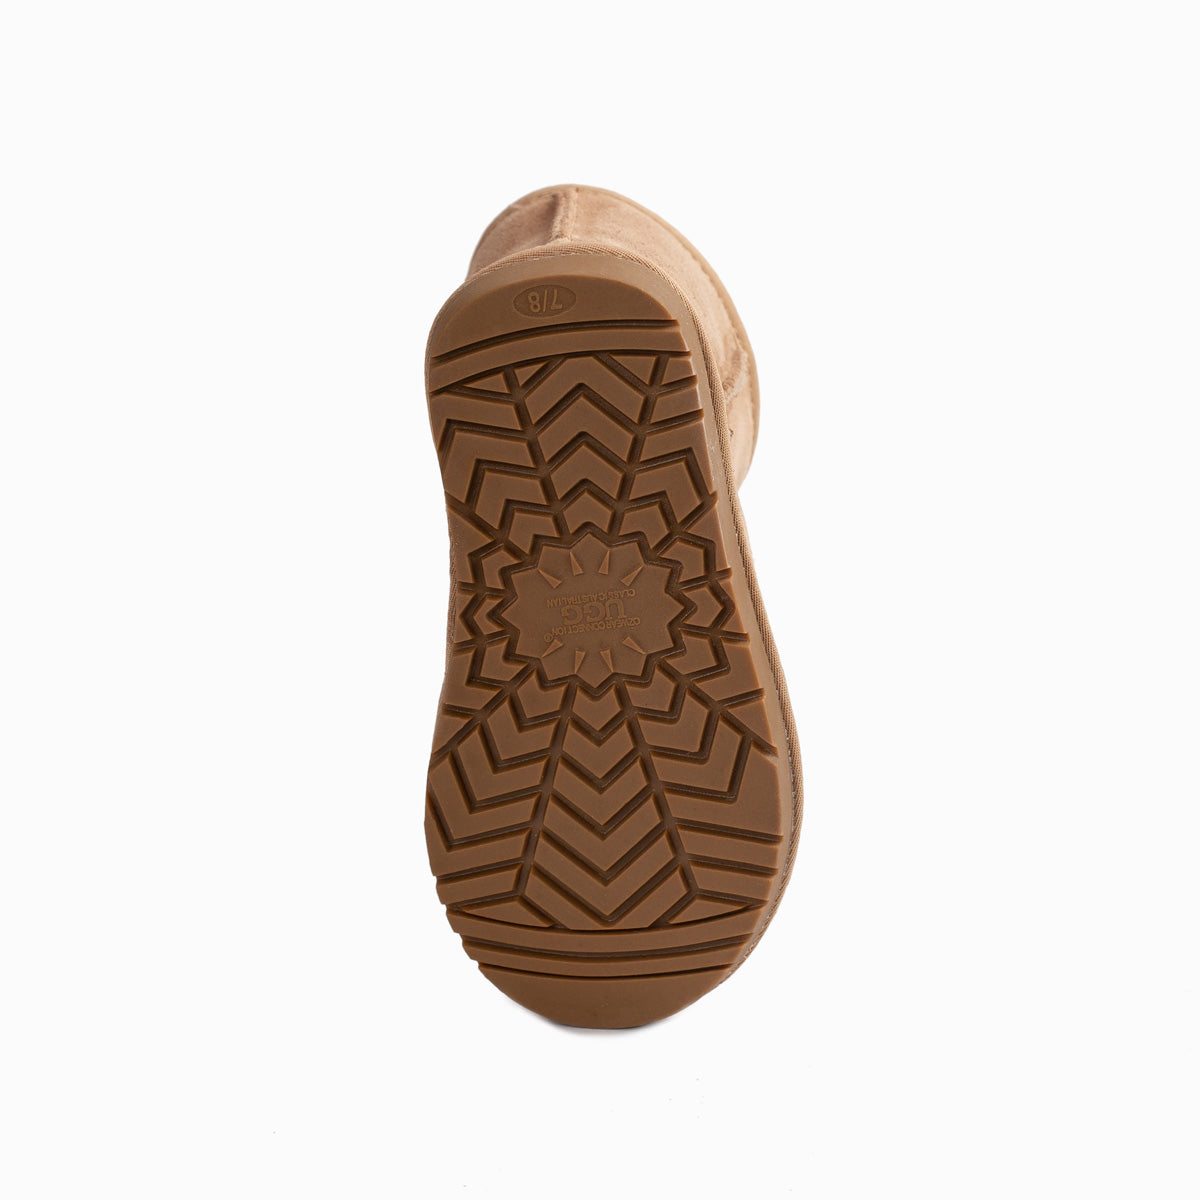 Ugg Kids Mini Boots (Water Resistant)